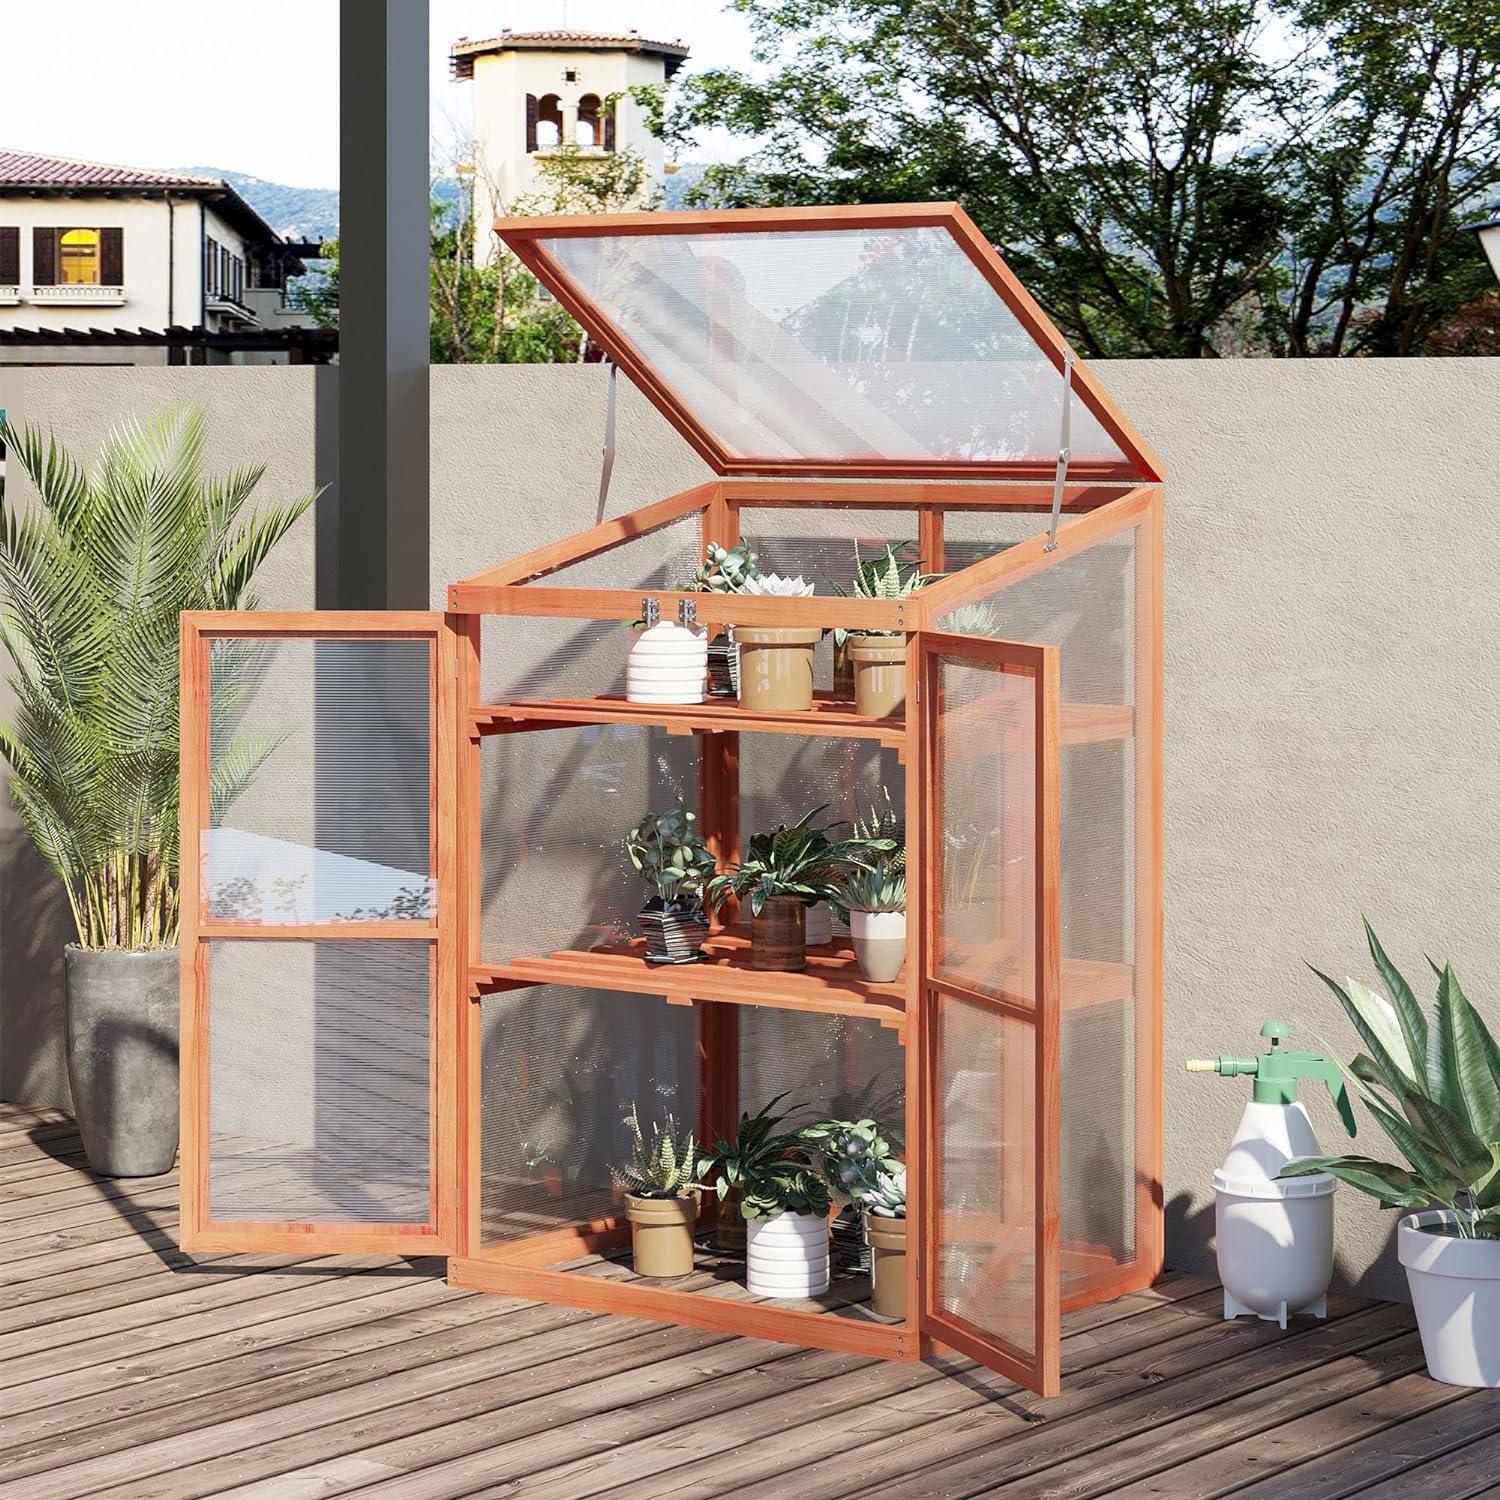 Outsunny Wooden Cold Frame Small Mini Greenhouse Cabinet for Outdoor and Indoor, 30 L x 24 W x 44 H, Natural